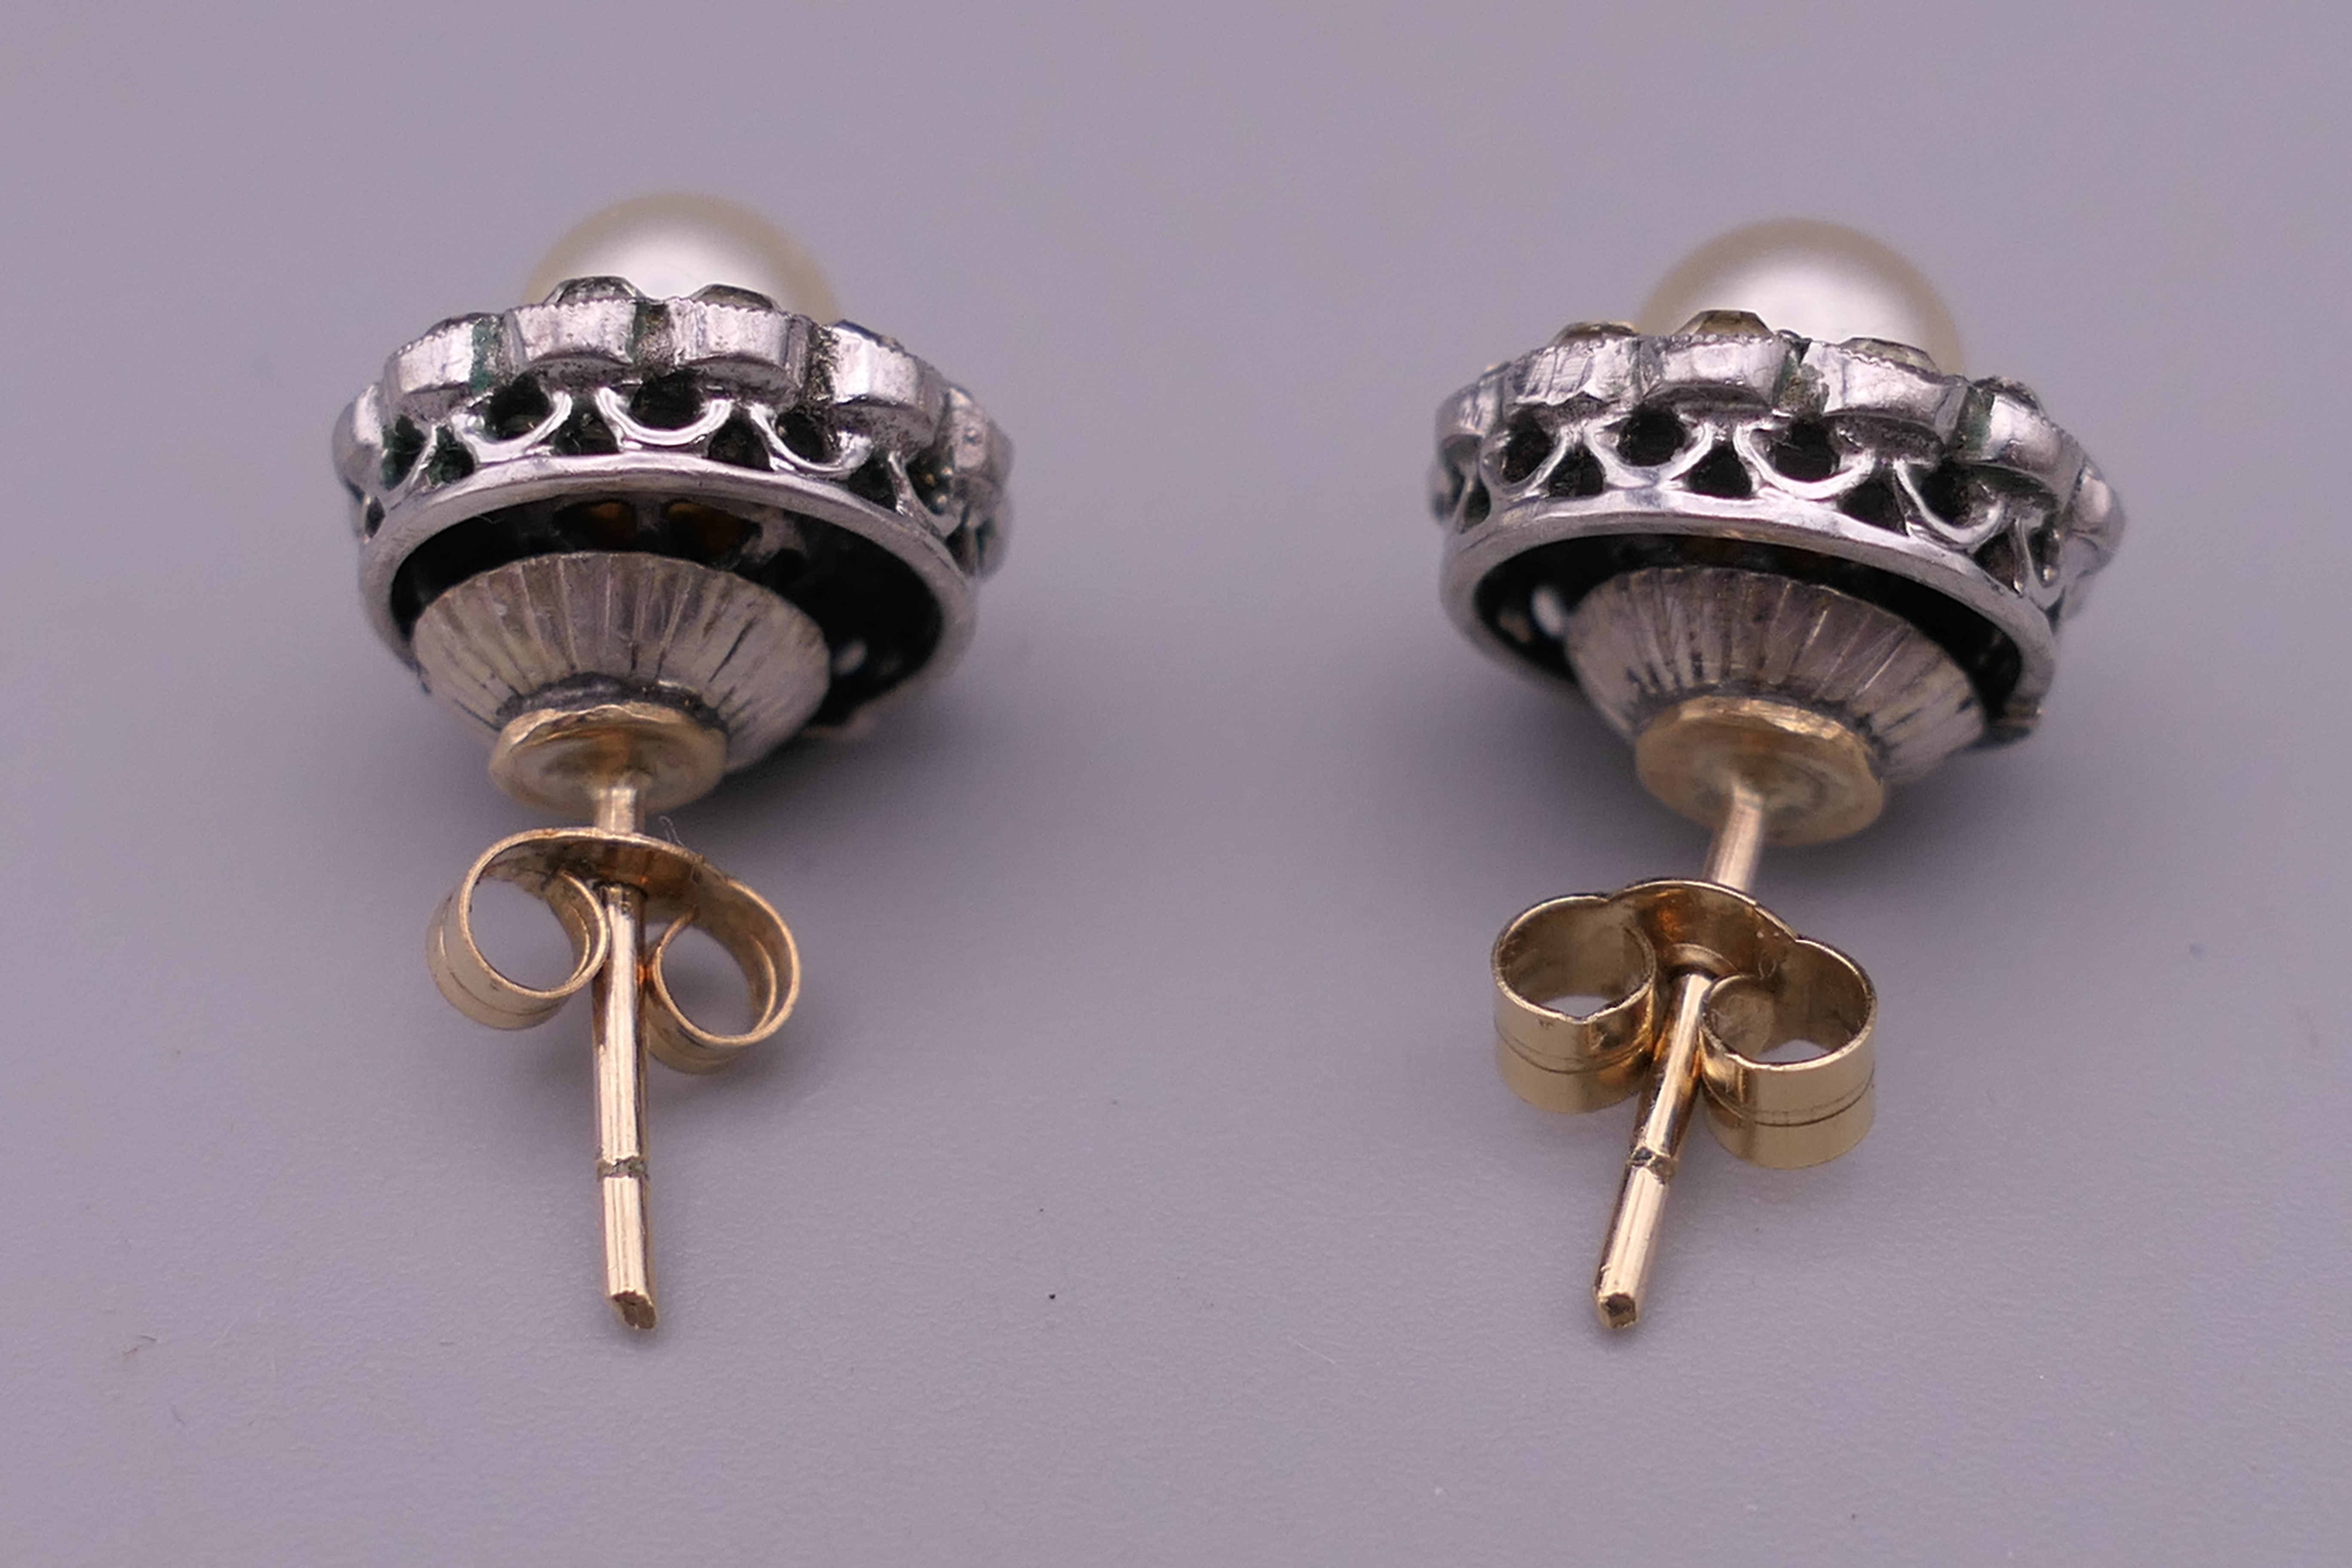 A pair of Ciro of London 9 ct gold mounted earrings. 1 cm diameter. - Image 3 of 5